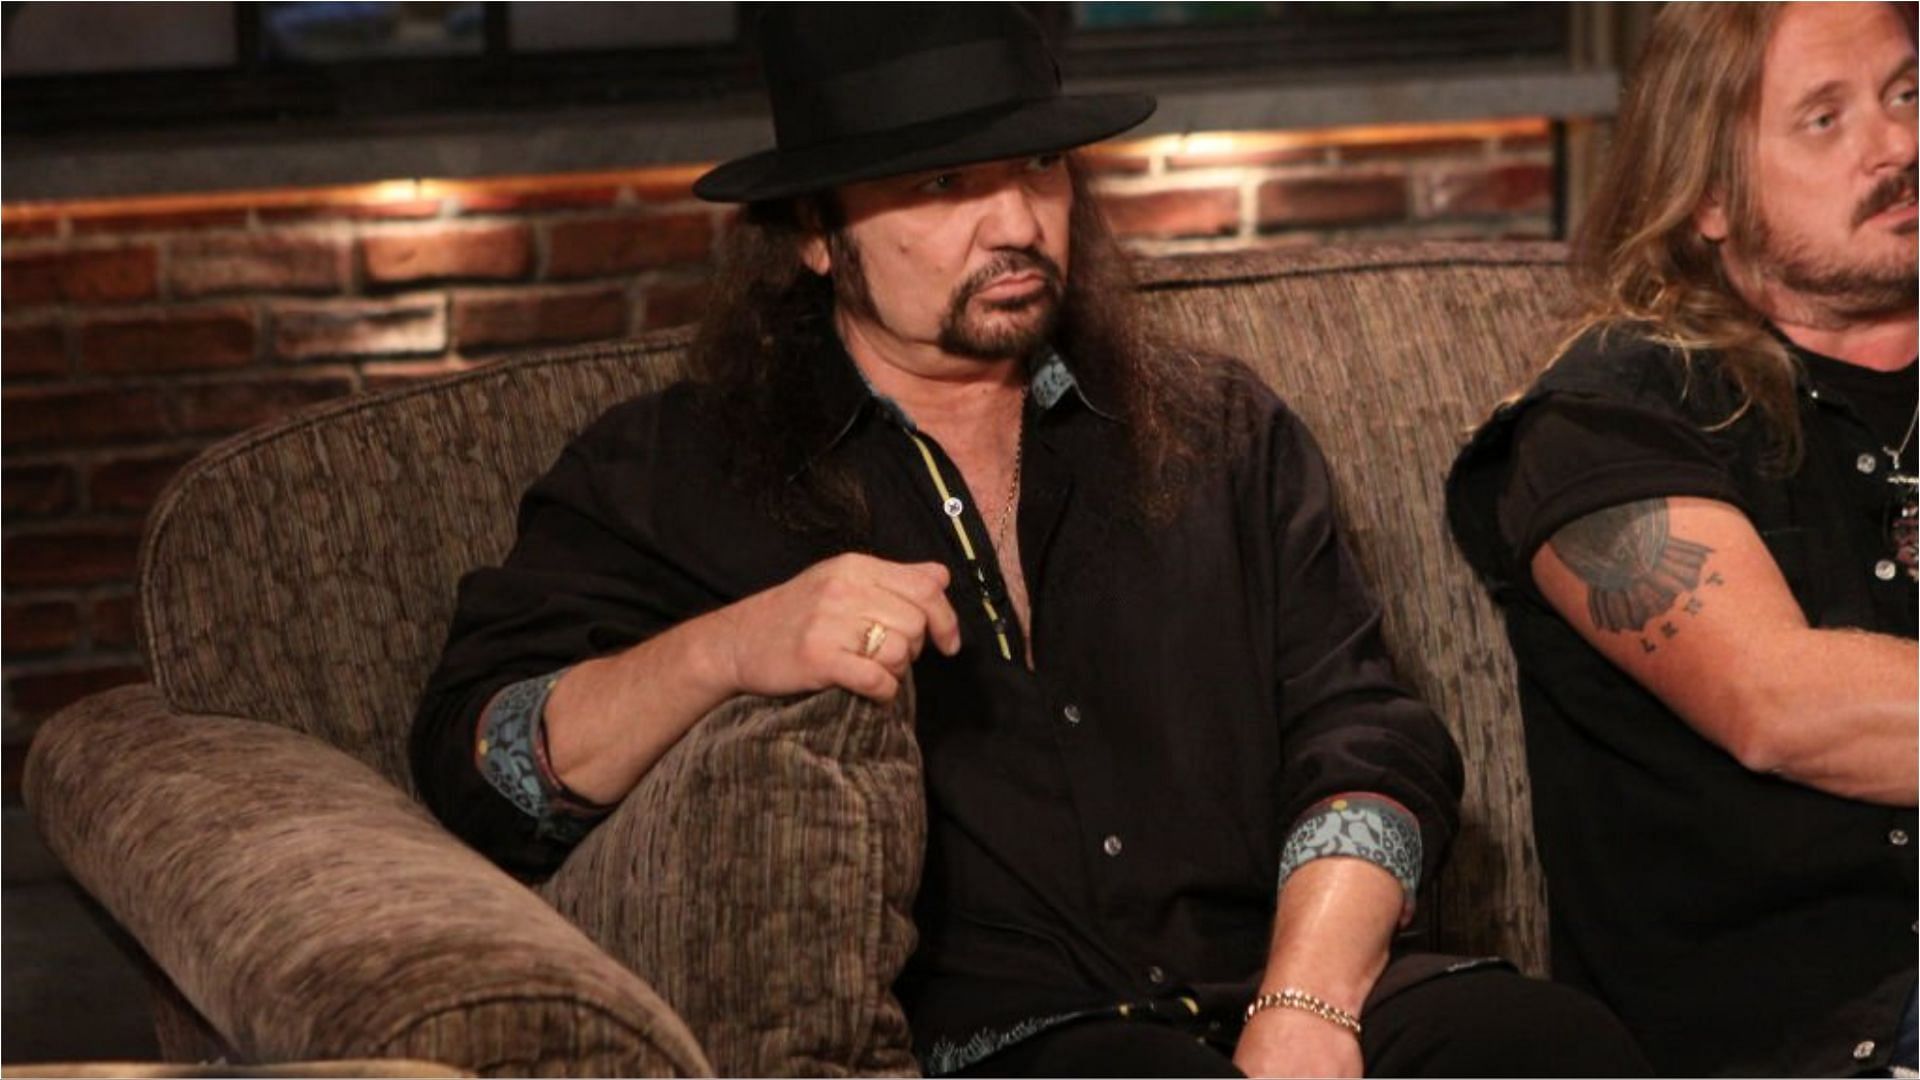 Gary Rossington has accumulated a lot of wealth from her career in the music industry (Image via Bill Tompkins/Getty Images)